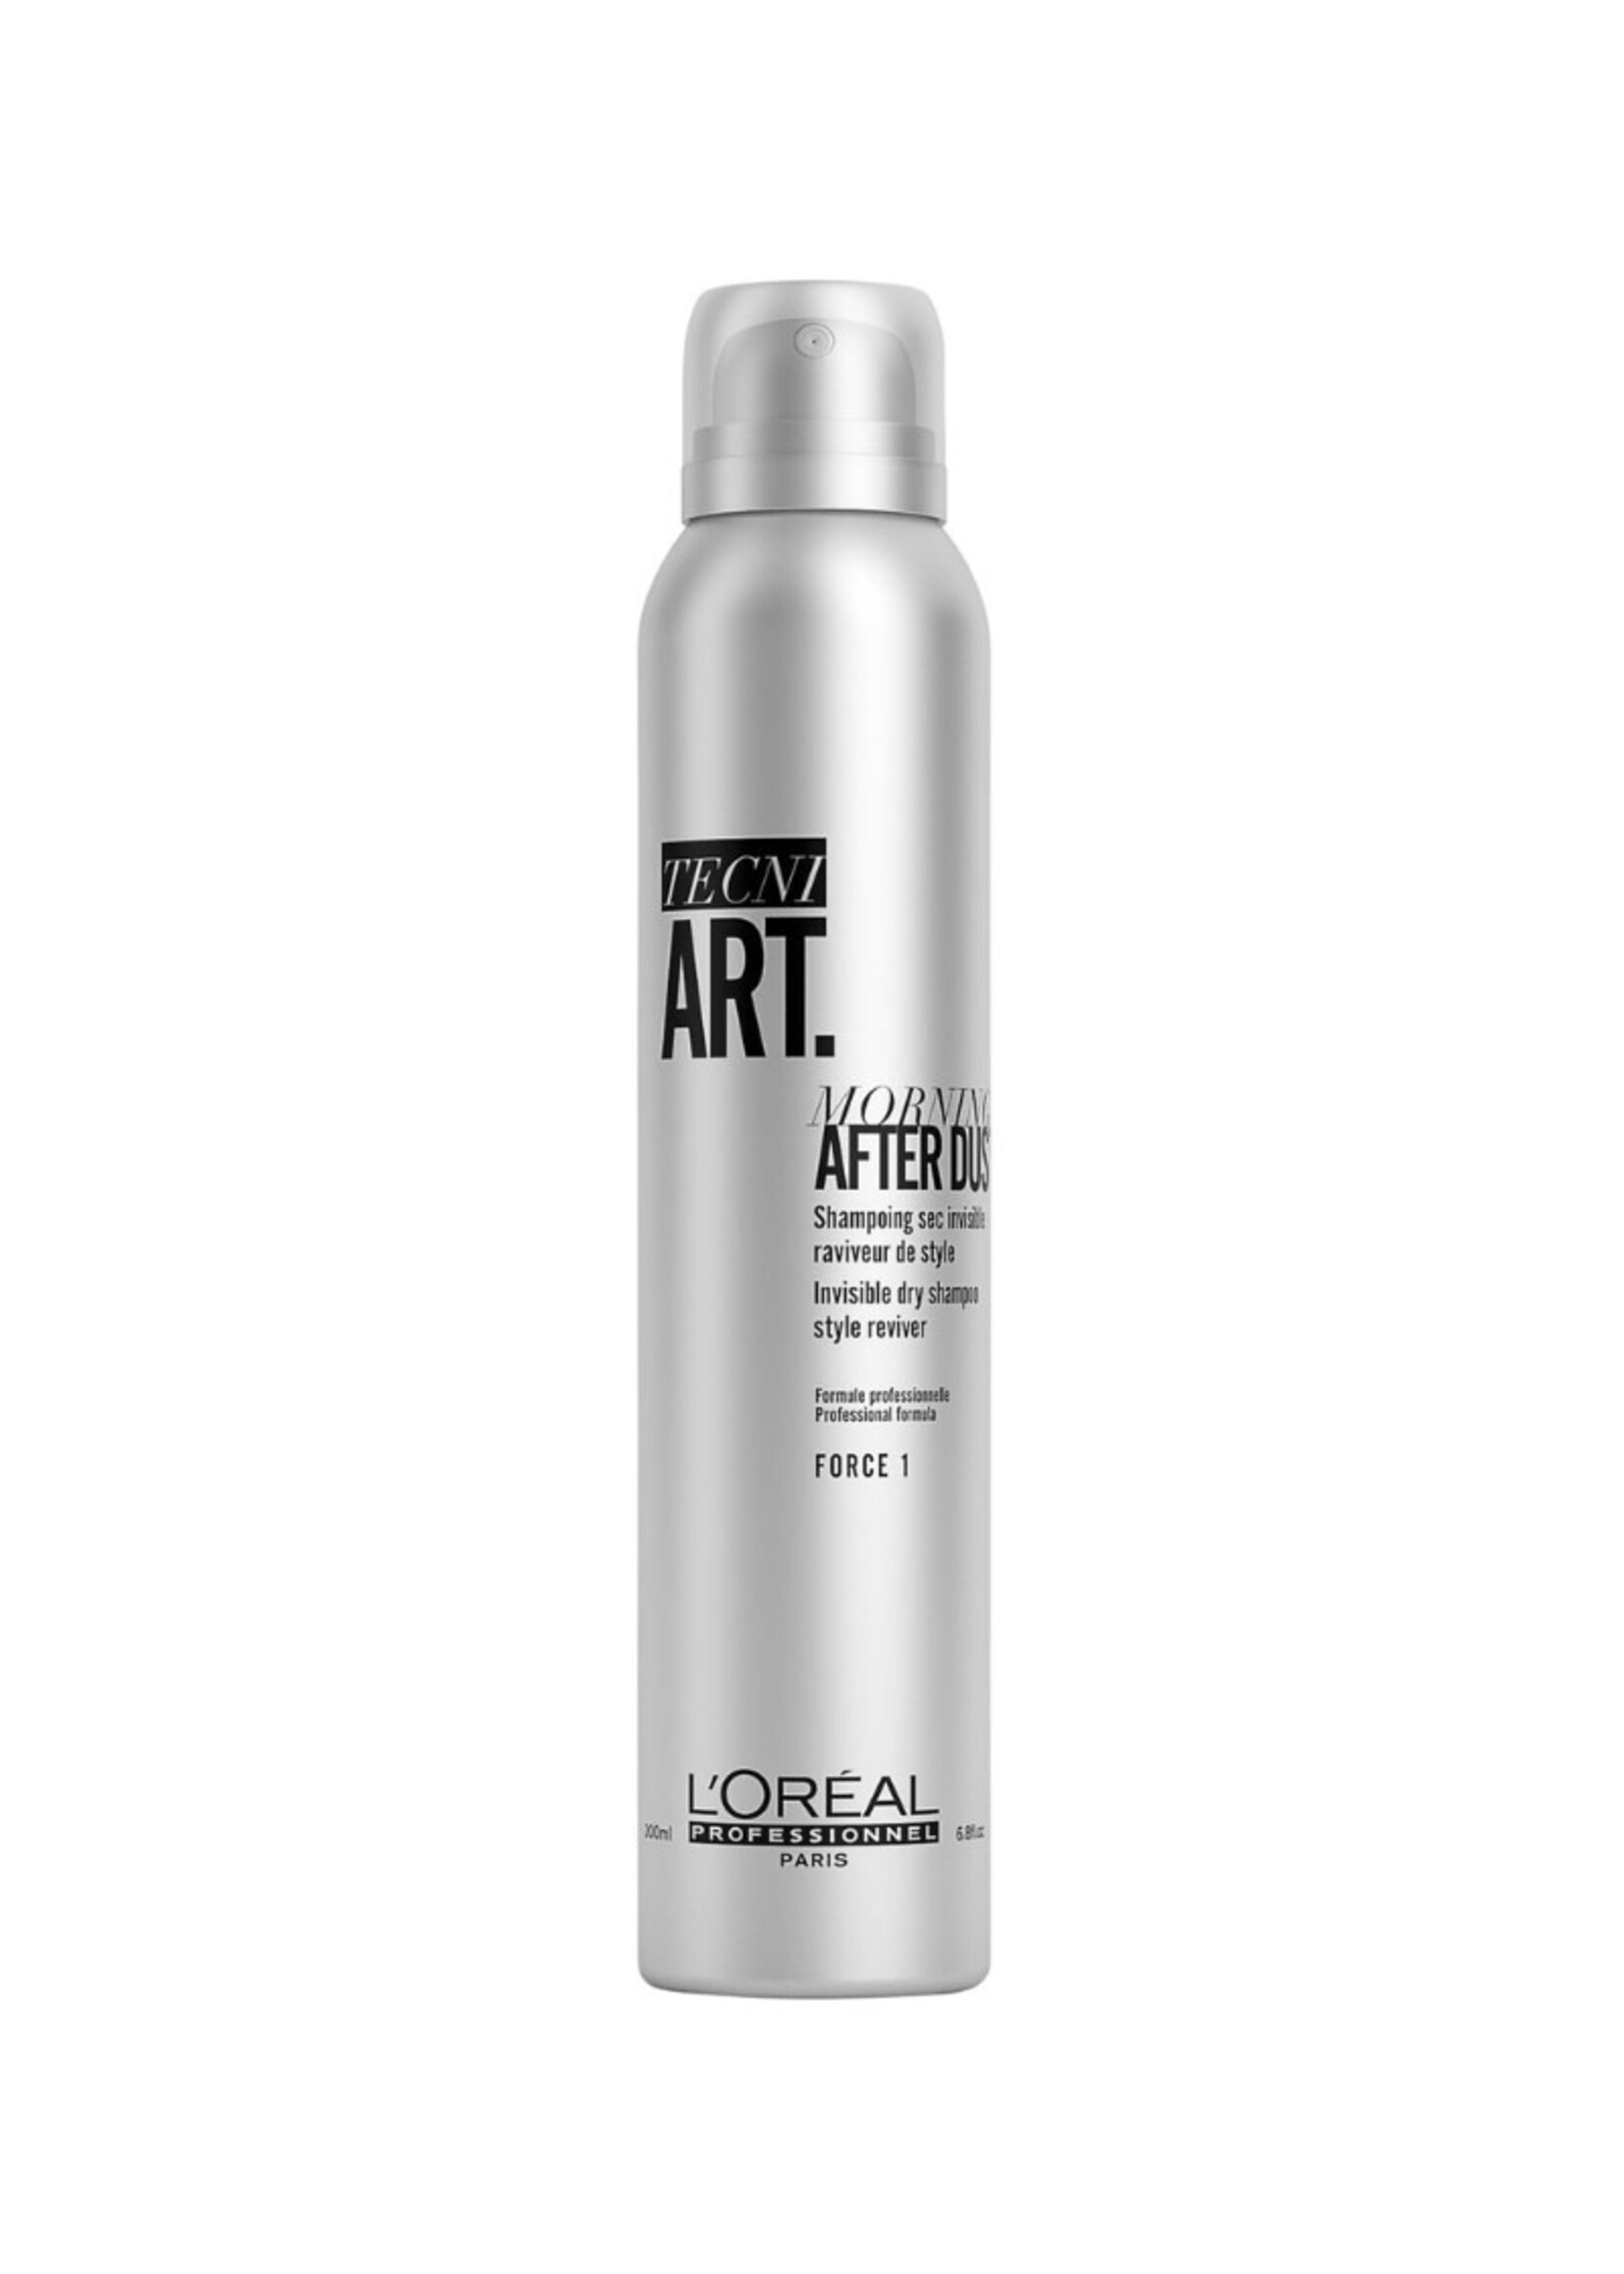 Loreal Professional Loreal Tecni.ART Morning After Dust 200ml